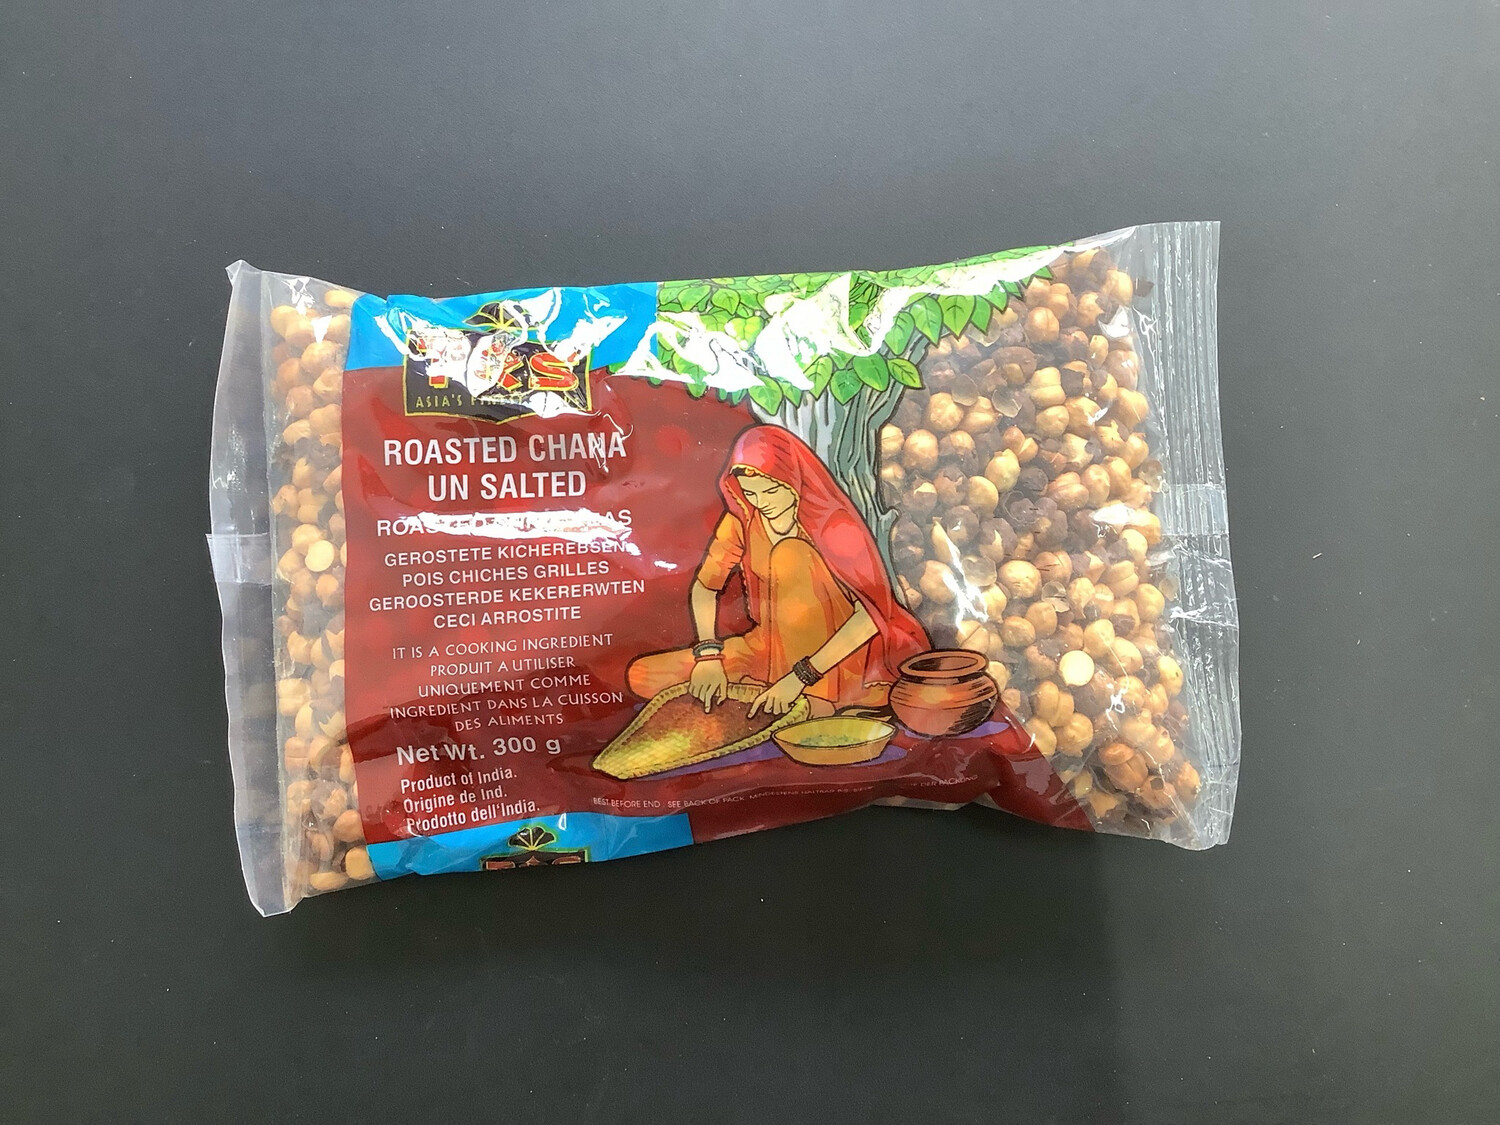 TRS Roasted Chana Unsalted 300g